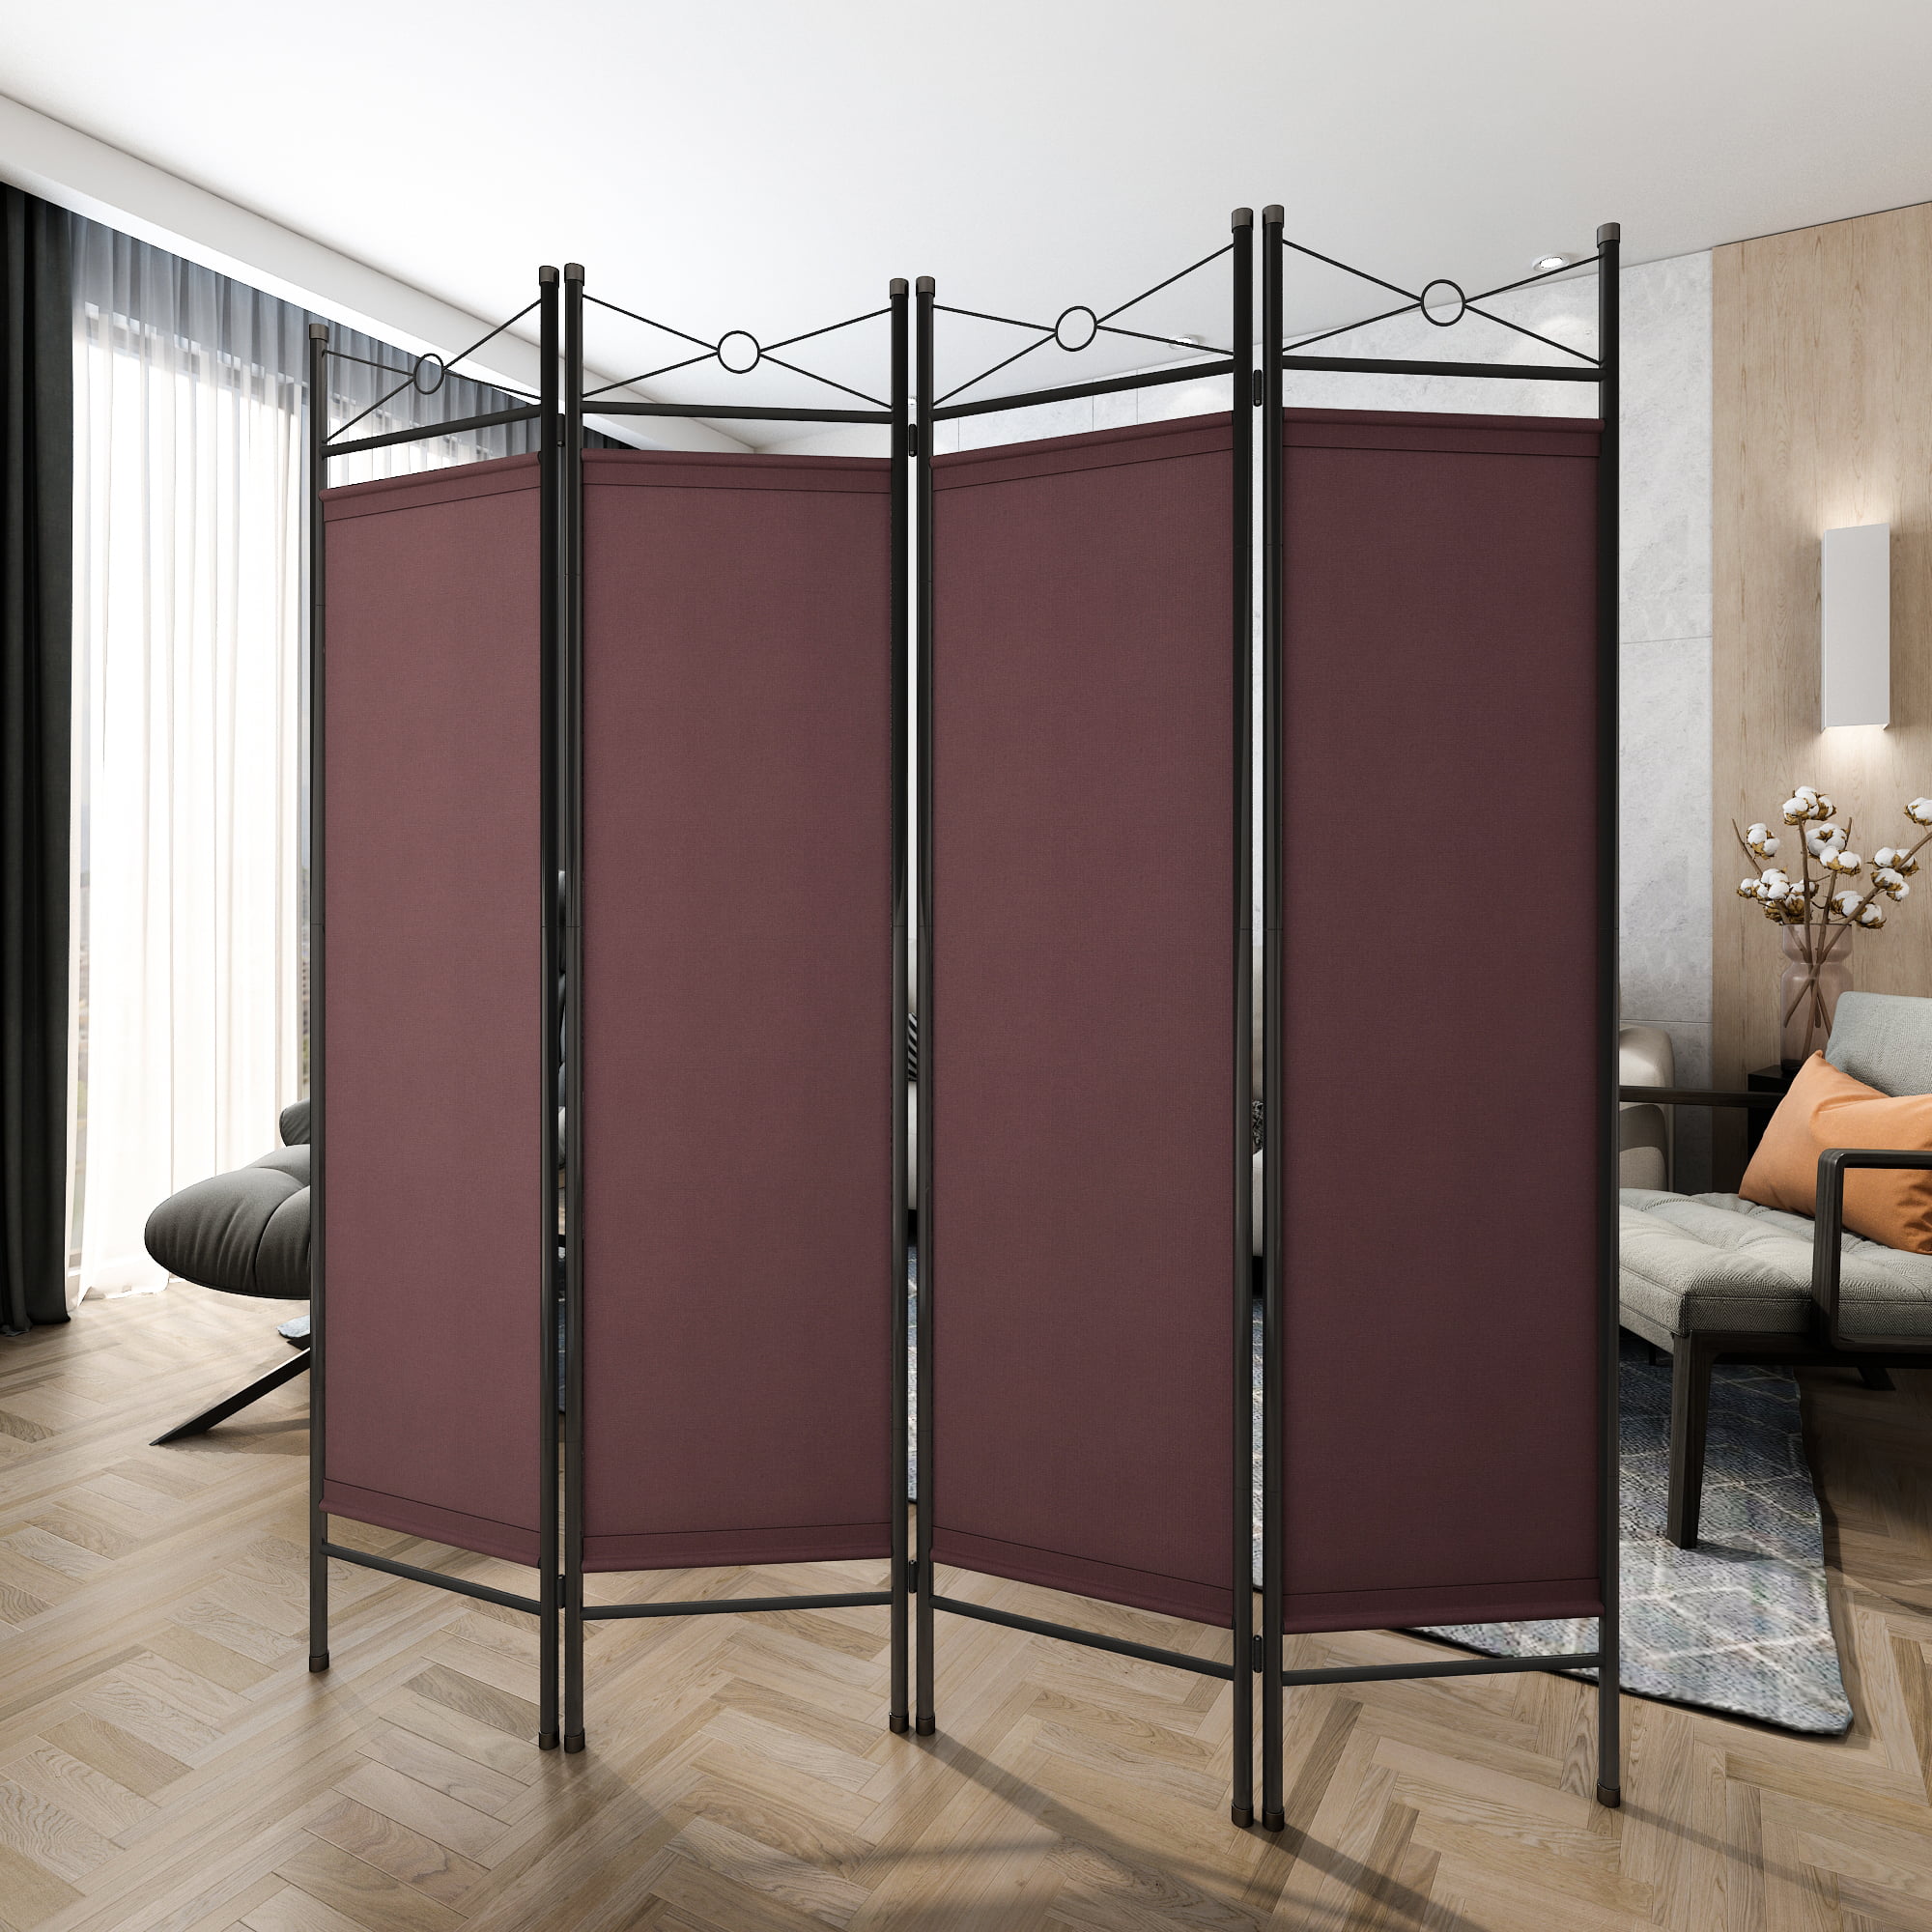 Details about   Folding Wooden Room Screen Divider With 4 Flexible Panels Easy To Move And Store 